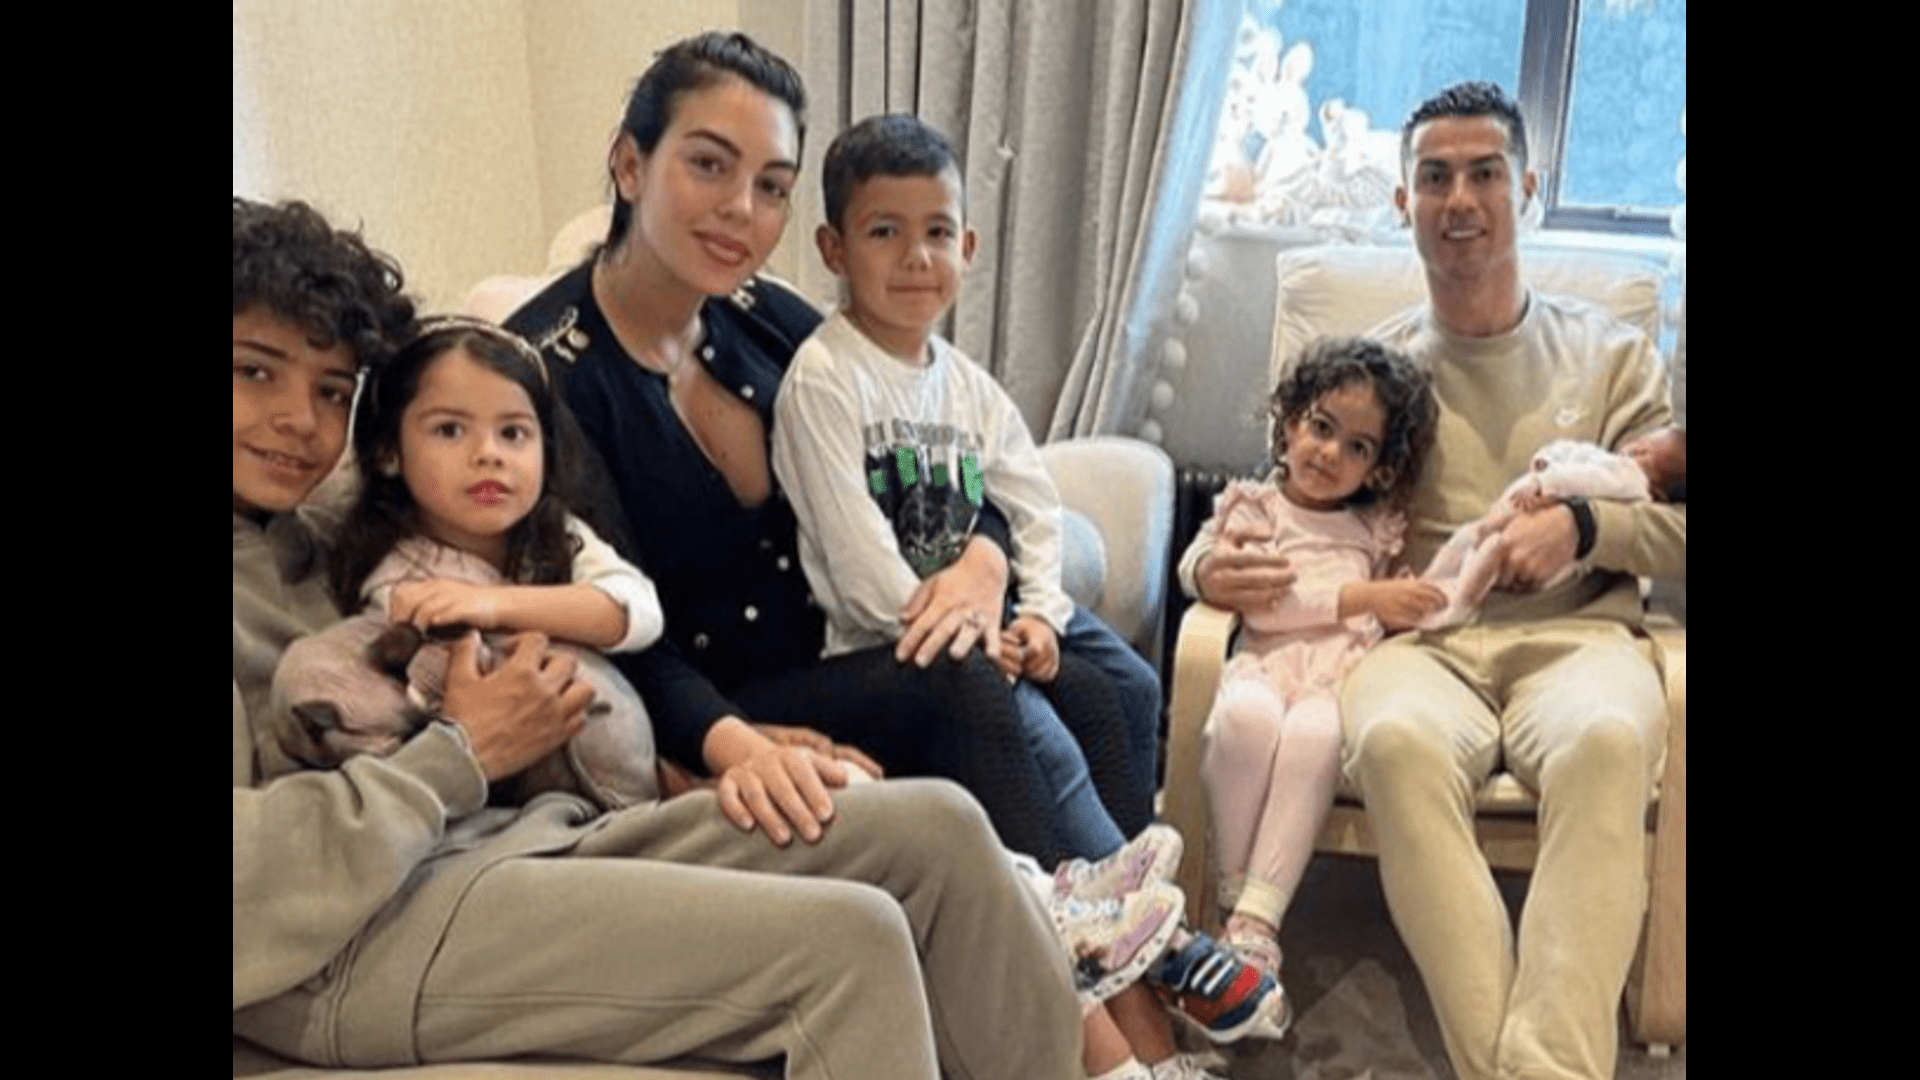 cristiano-ronaldo-shares-their-first-family-photo-with-newborn-daughter